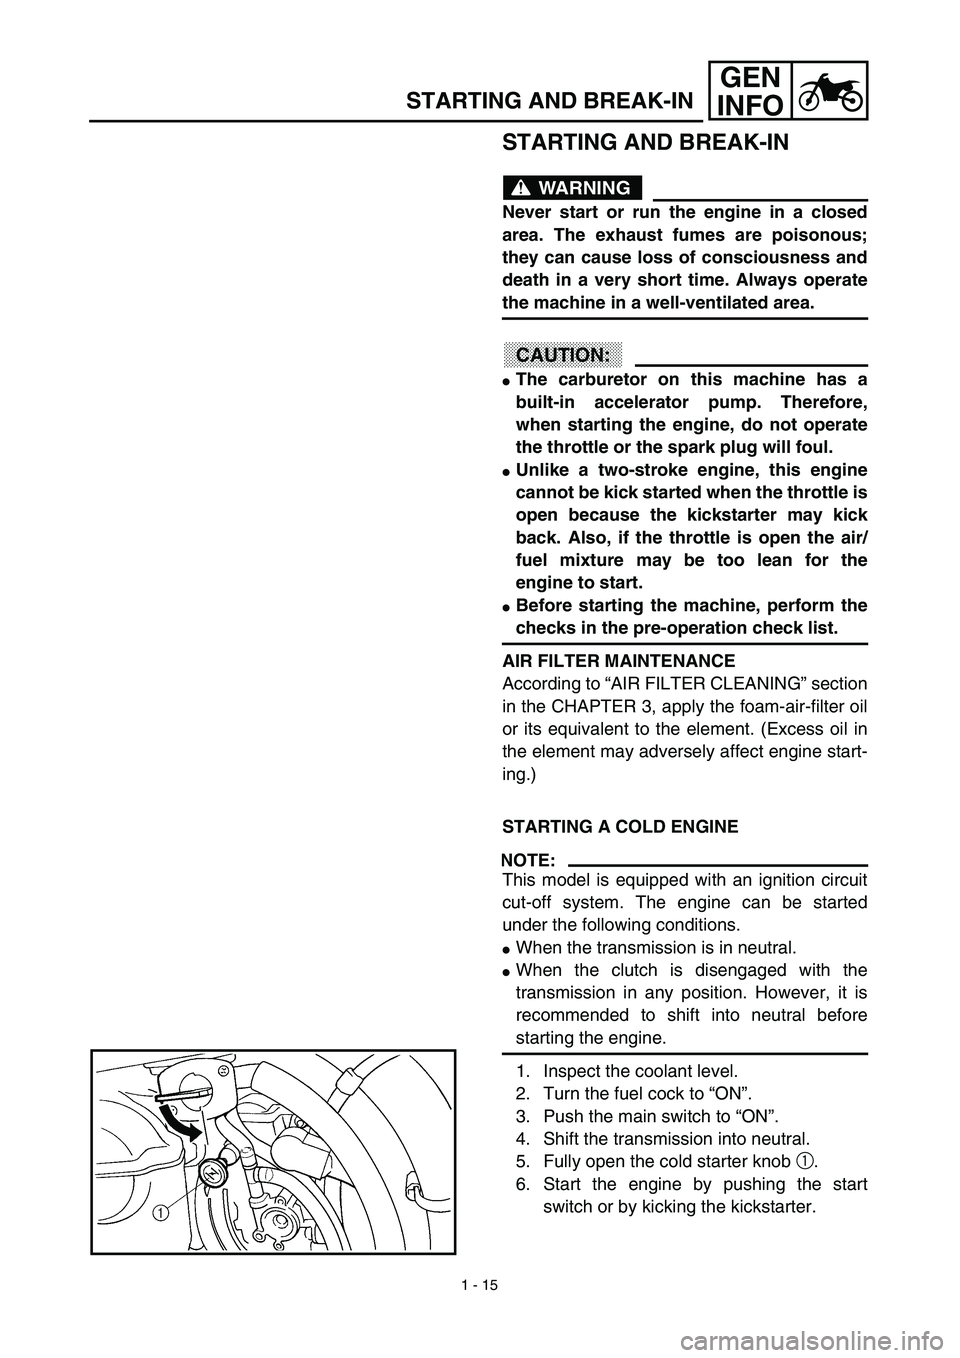 YAMAHA WR 450F 2003  Owners Manual 1 - 15
GEN
INFO
STARTING AND BREAK-IN
STARTING AND BREAK-IN
WARNING
Never start or run the engine in a closed
area. The exhaust fumes are poisonous;
they can cause loss of consciousness and
death in a